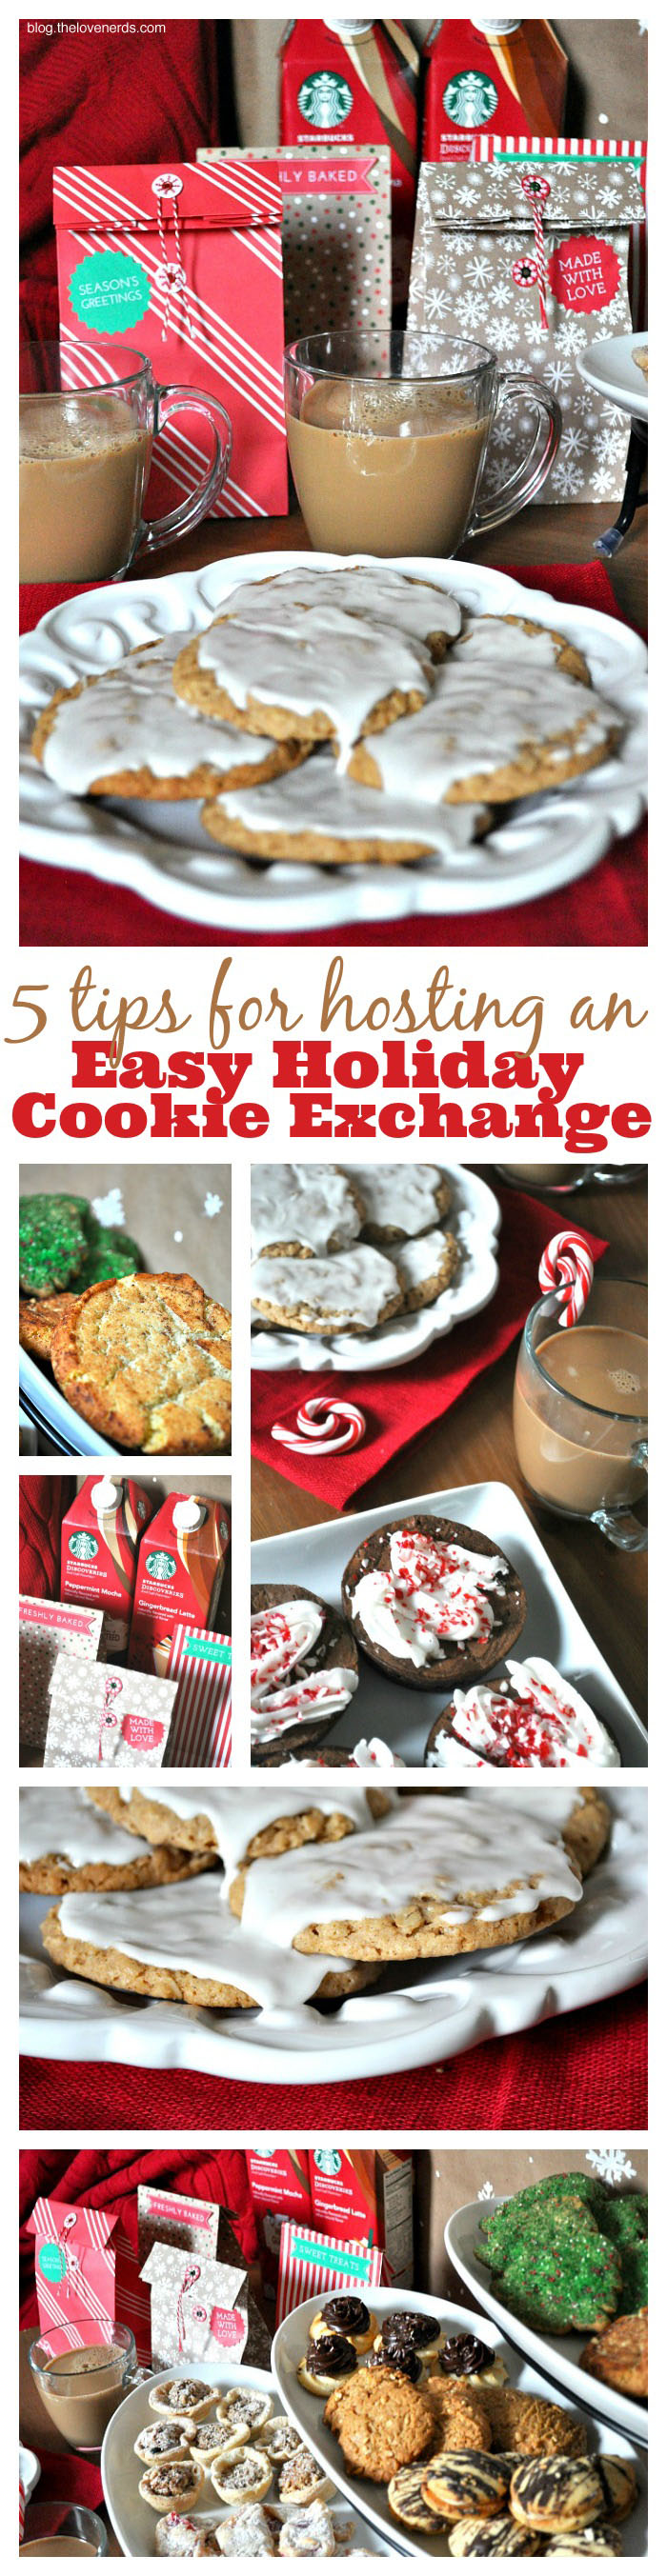 5 Tips for Hosting an Easy and Fun Holiday Cookie Exchange Party - I had so much fun with this party, and it really came together quickly. Everyone contributes cookies to share, and I relied on Starbucks Discoveries Iced Café Favorites™ Peppermint Mocha and Gingerbread Latte for a special drink I could easily pour! {The Love Nerds} #starbucksdiscoveries #ad